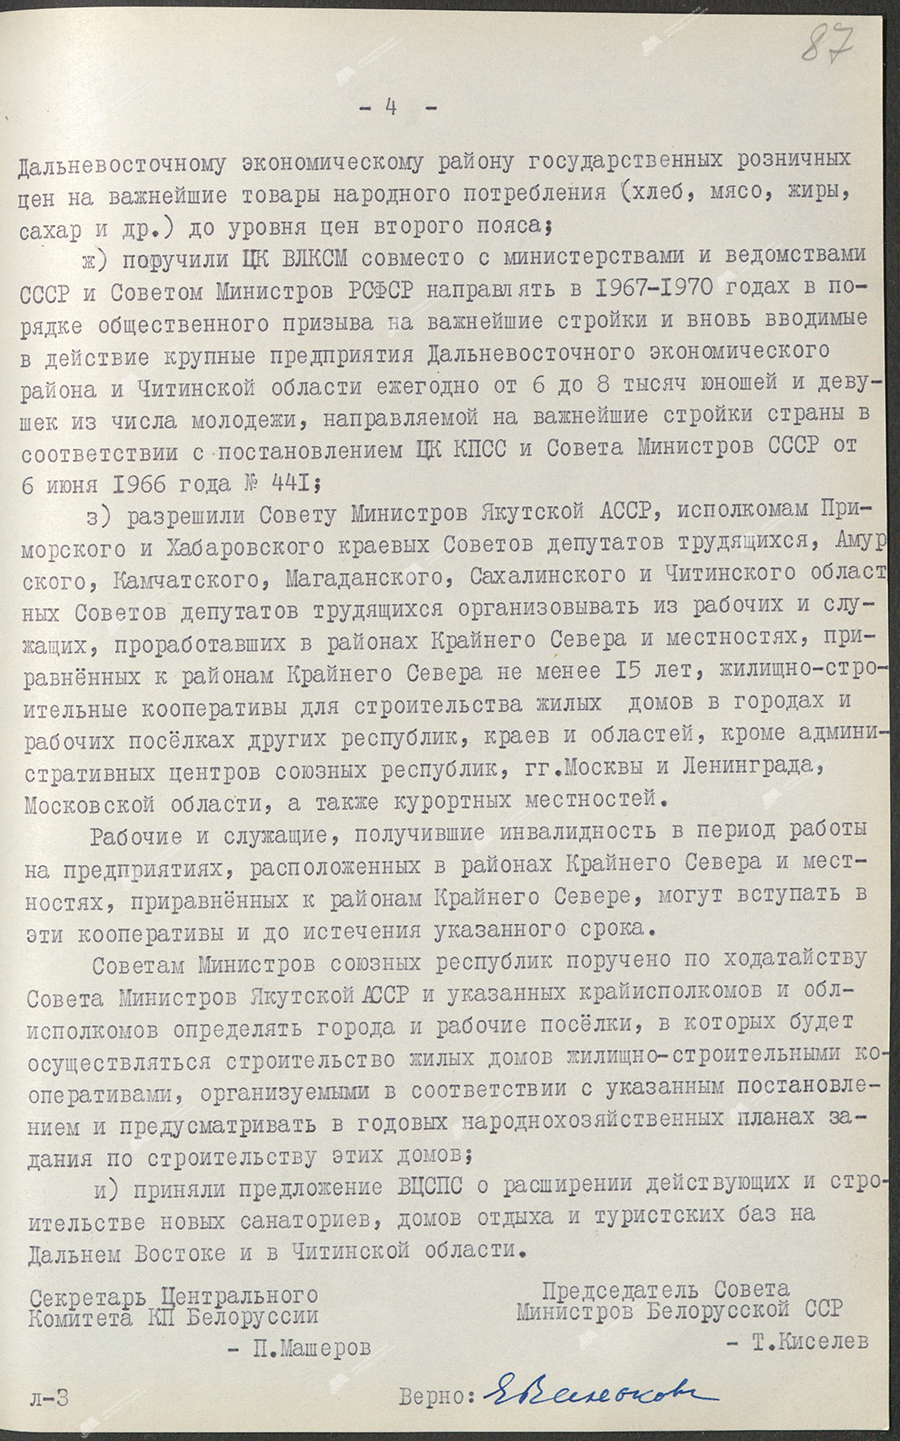 Resolution of the Central Committee of the Communist Party of Belarus and the Council of Ministers of the BSSR «On the plan for the resettlement of families from the BSSR to collective farms and state farms of the Far Eastern economic region and the Chita region»-стр. 3